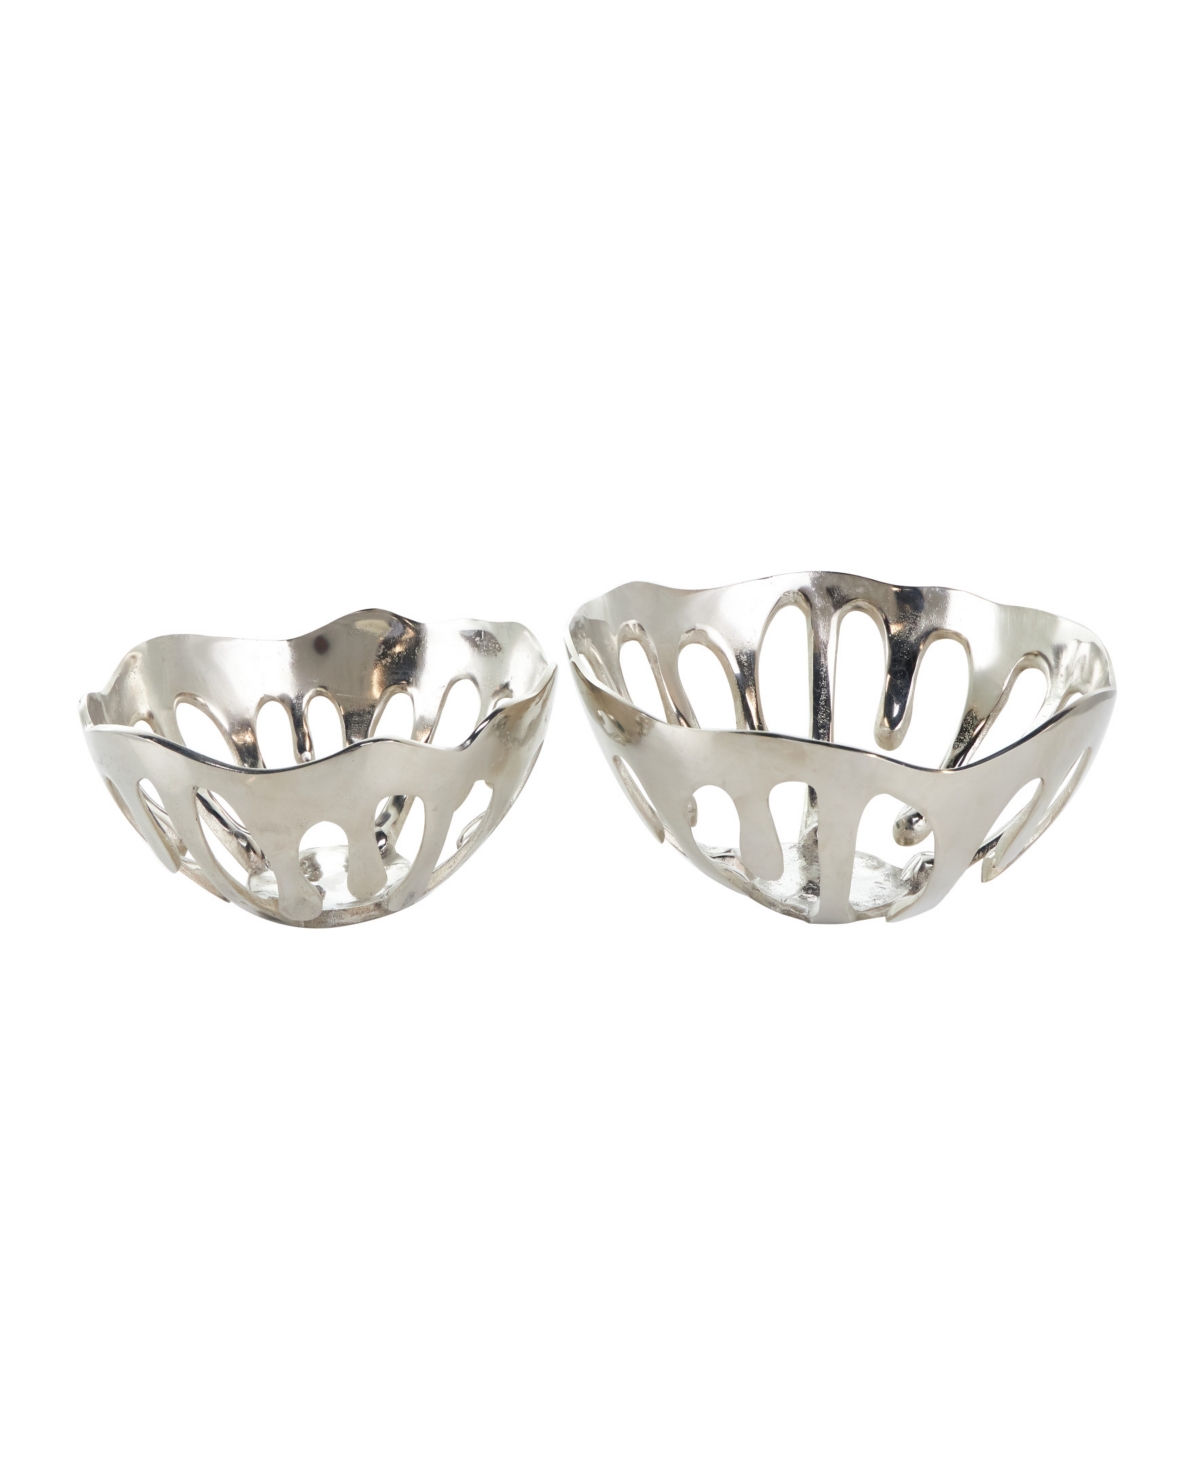 Aluminum Drip Decorative Bowl with Melting Designed Body, Set of 2 - 13", 11" H - Silver